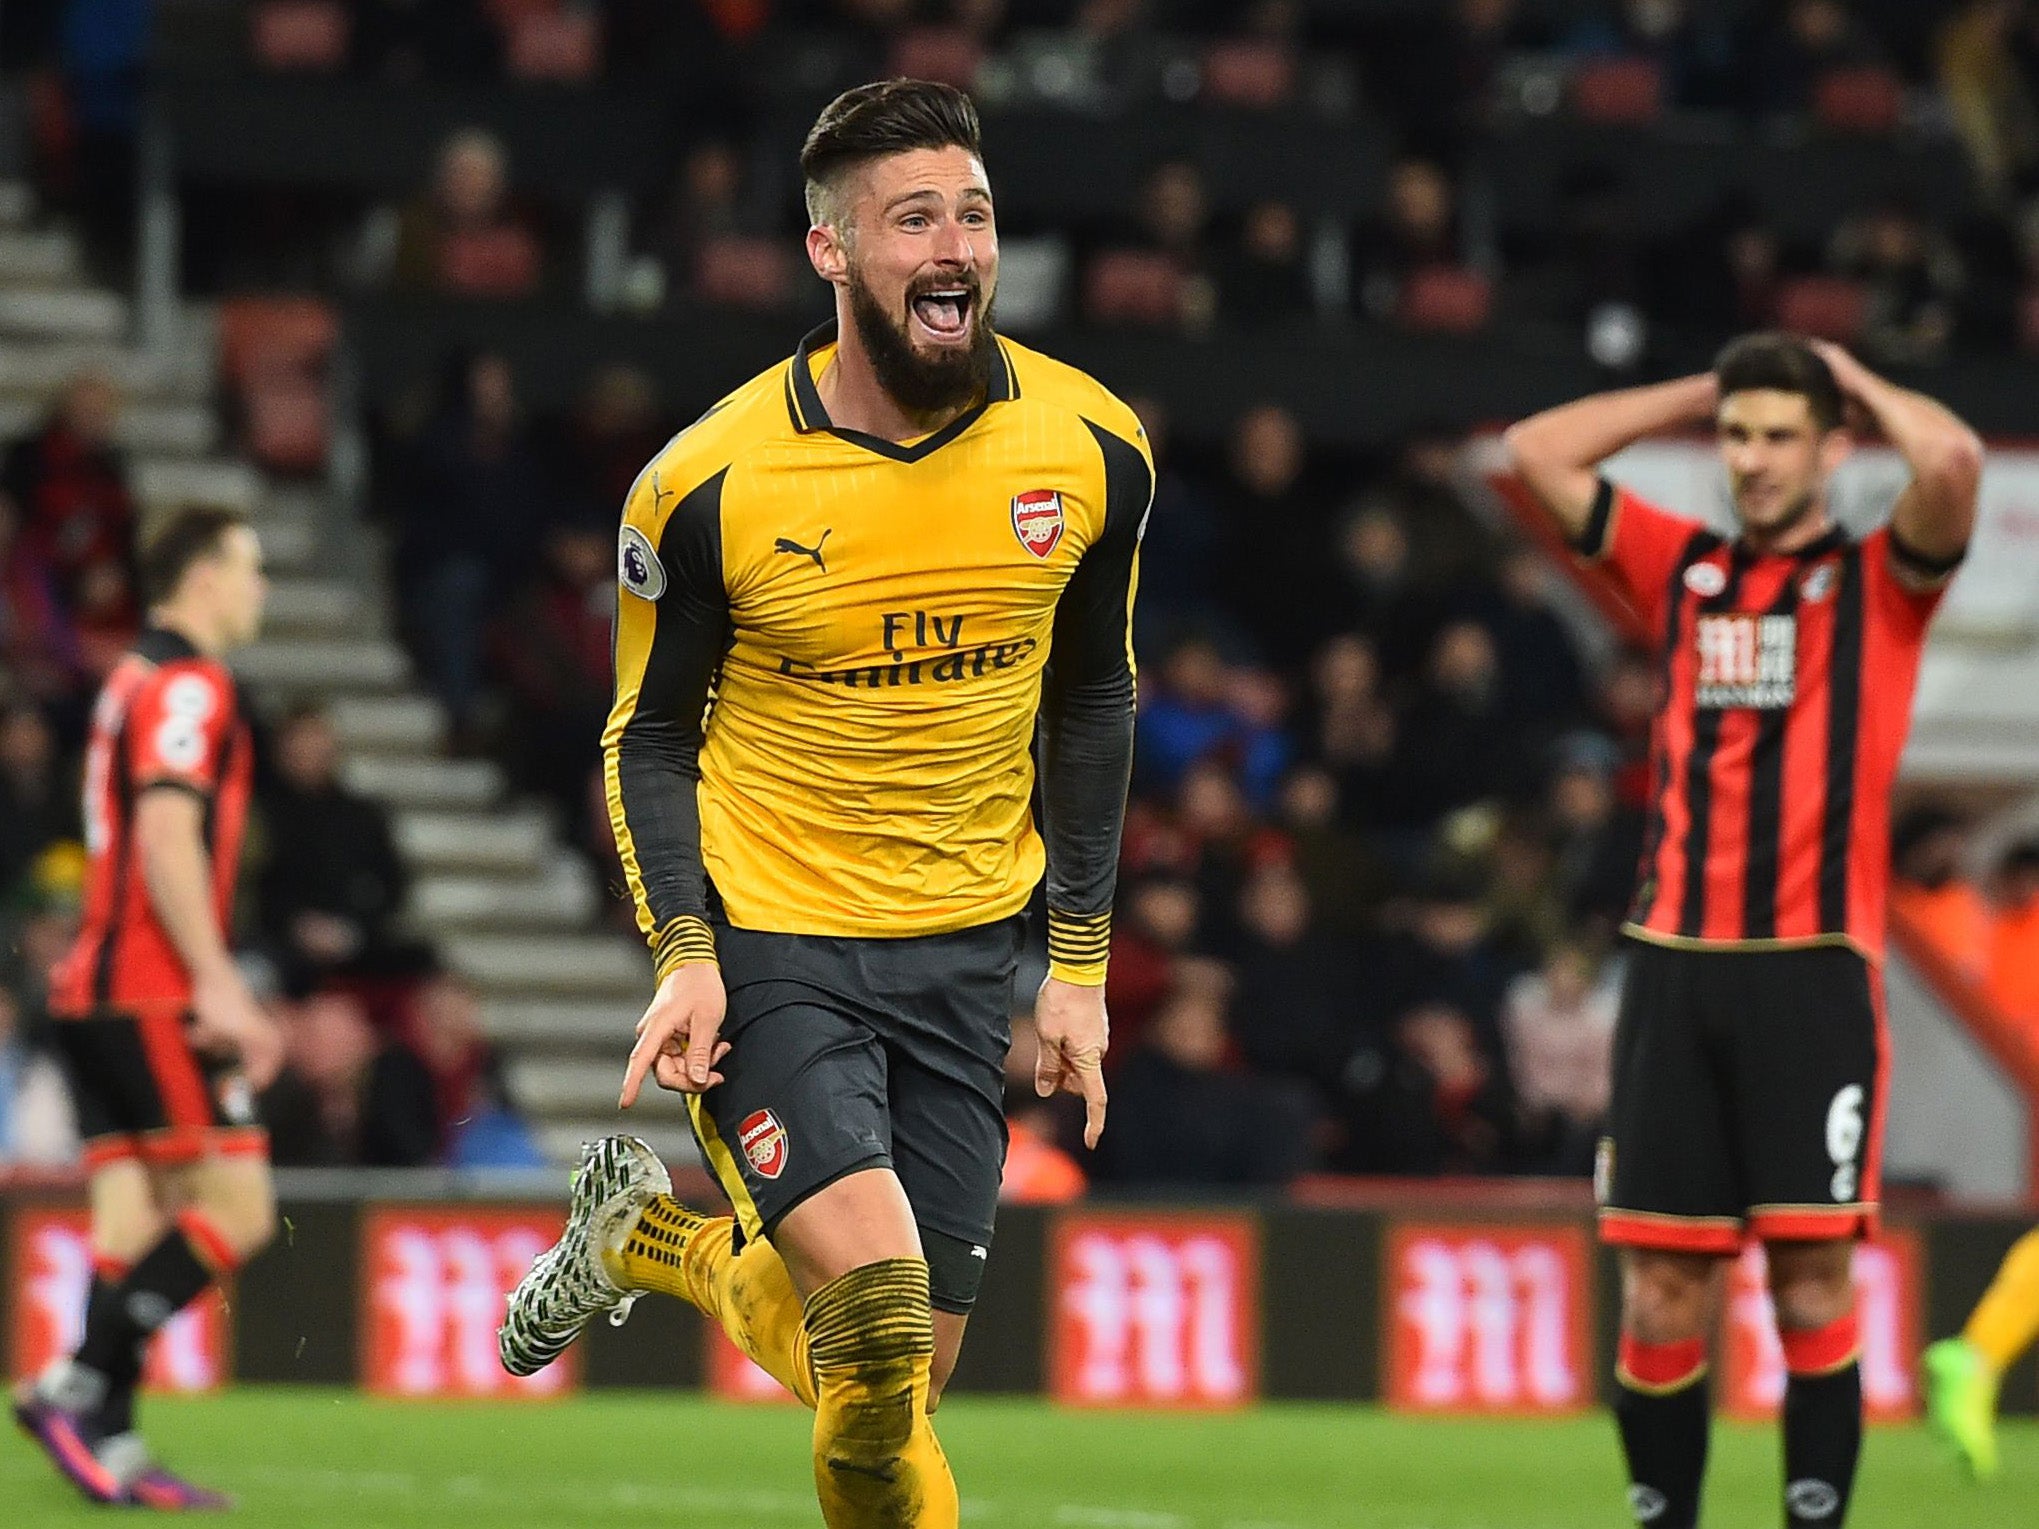 It was Giroud's second goal in three days